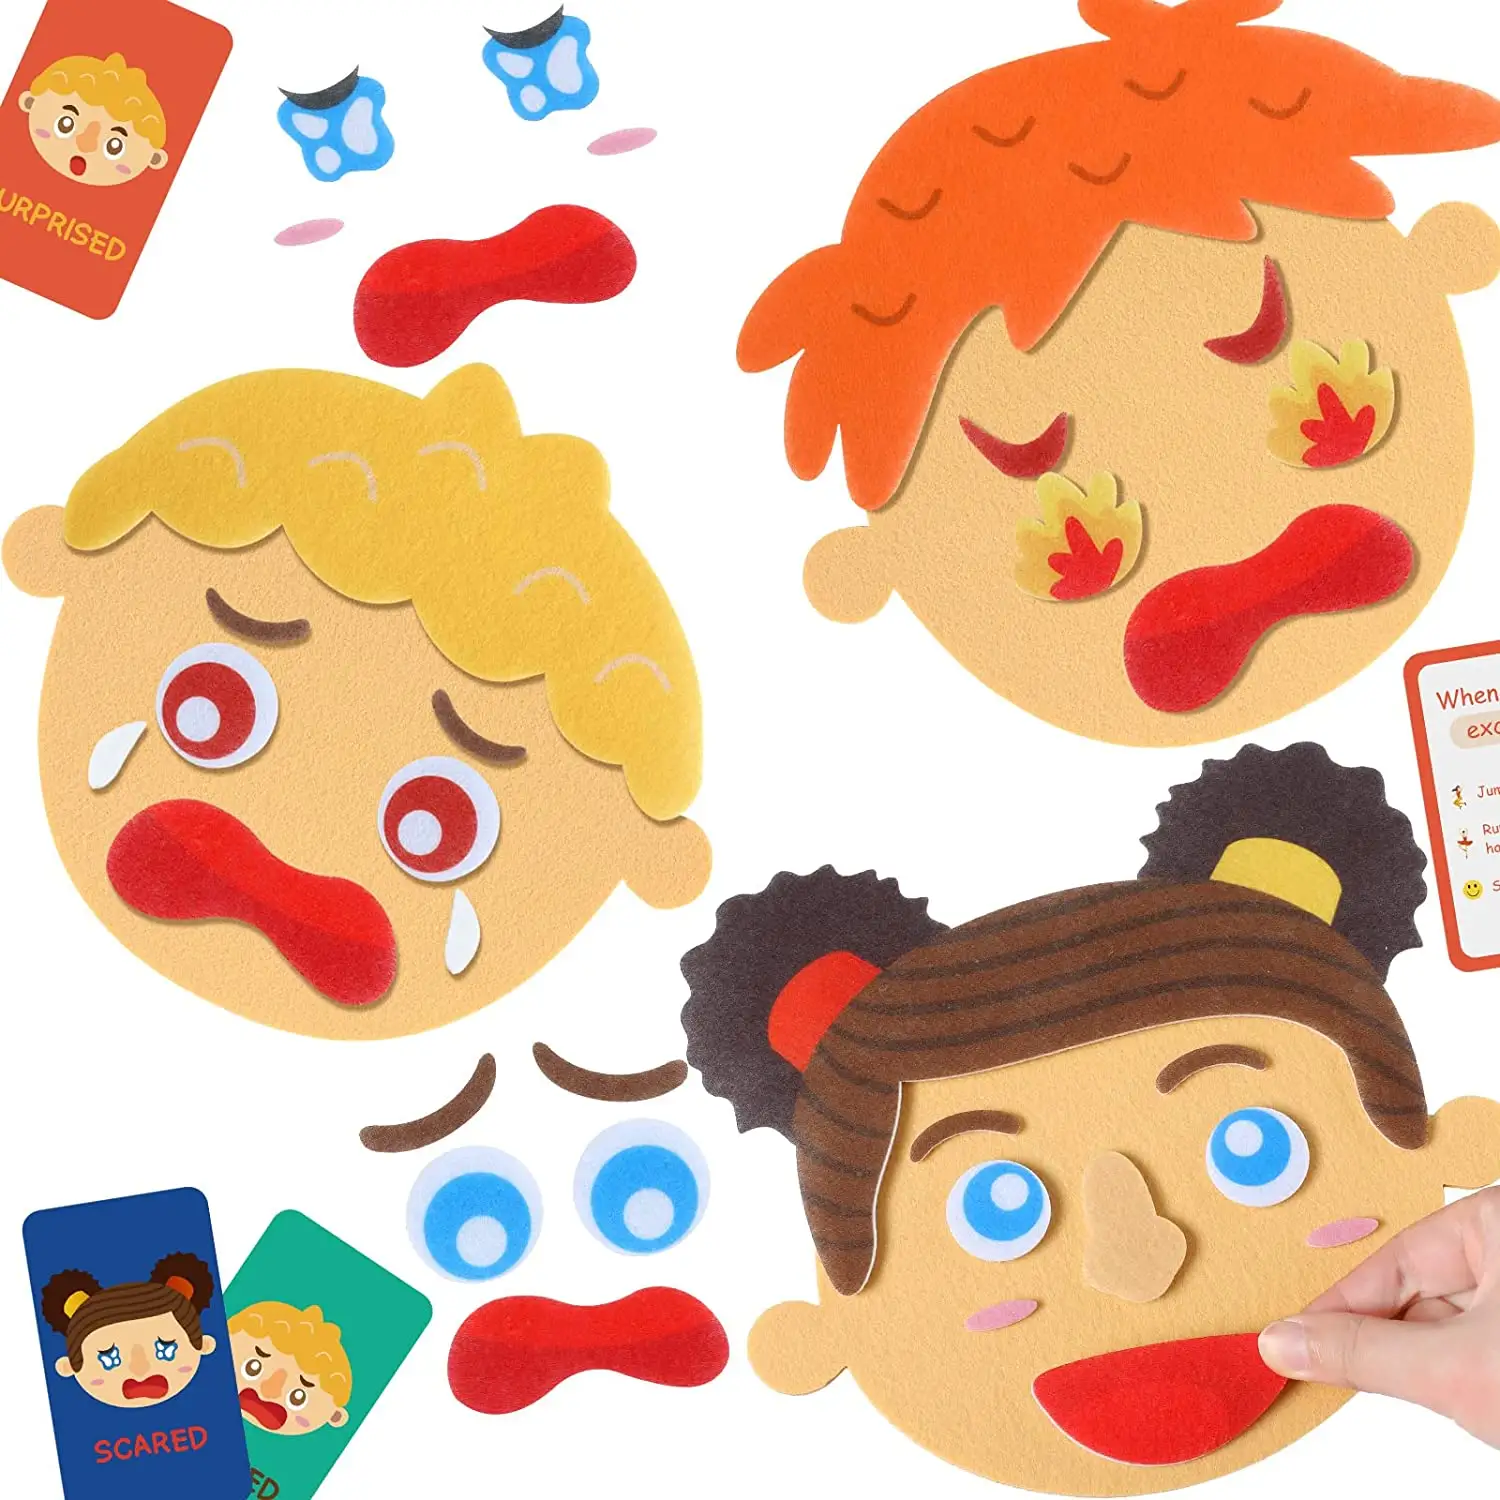 Social Emotional Learning Activities for Kids Making Faces and Describe Feelings Educational Games,Emotional Learning toy